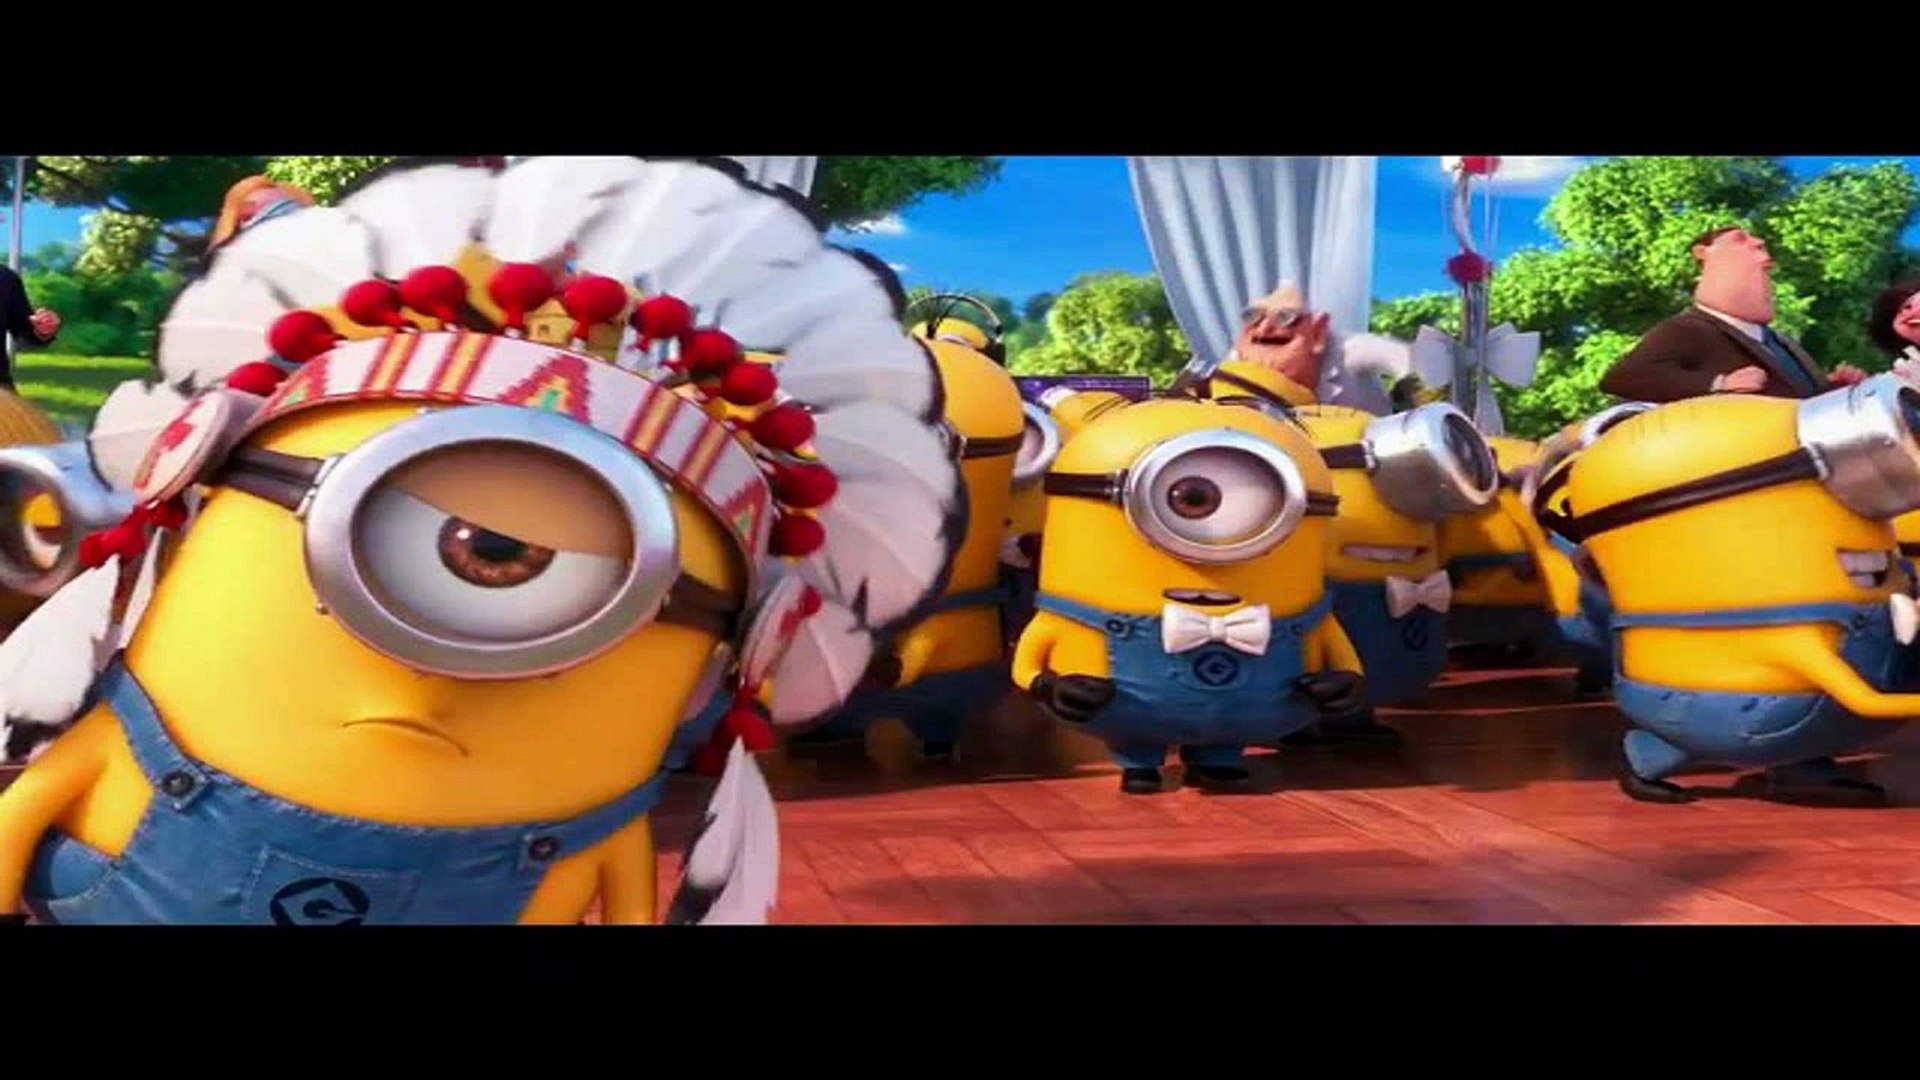 Pin by 𝗠𝗲𝗴𝗵𝗻𝗮 on Moving pictures [Video], Gru meme, Minions funny,  Gru and minions in 2023